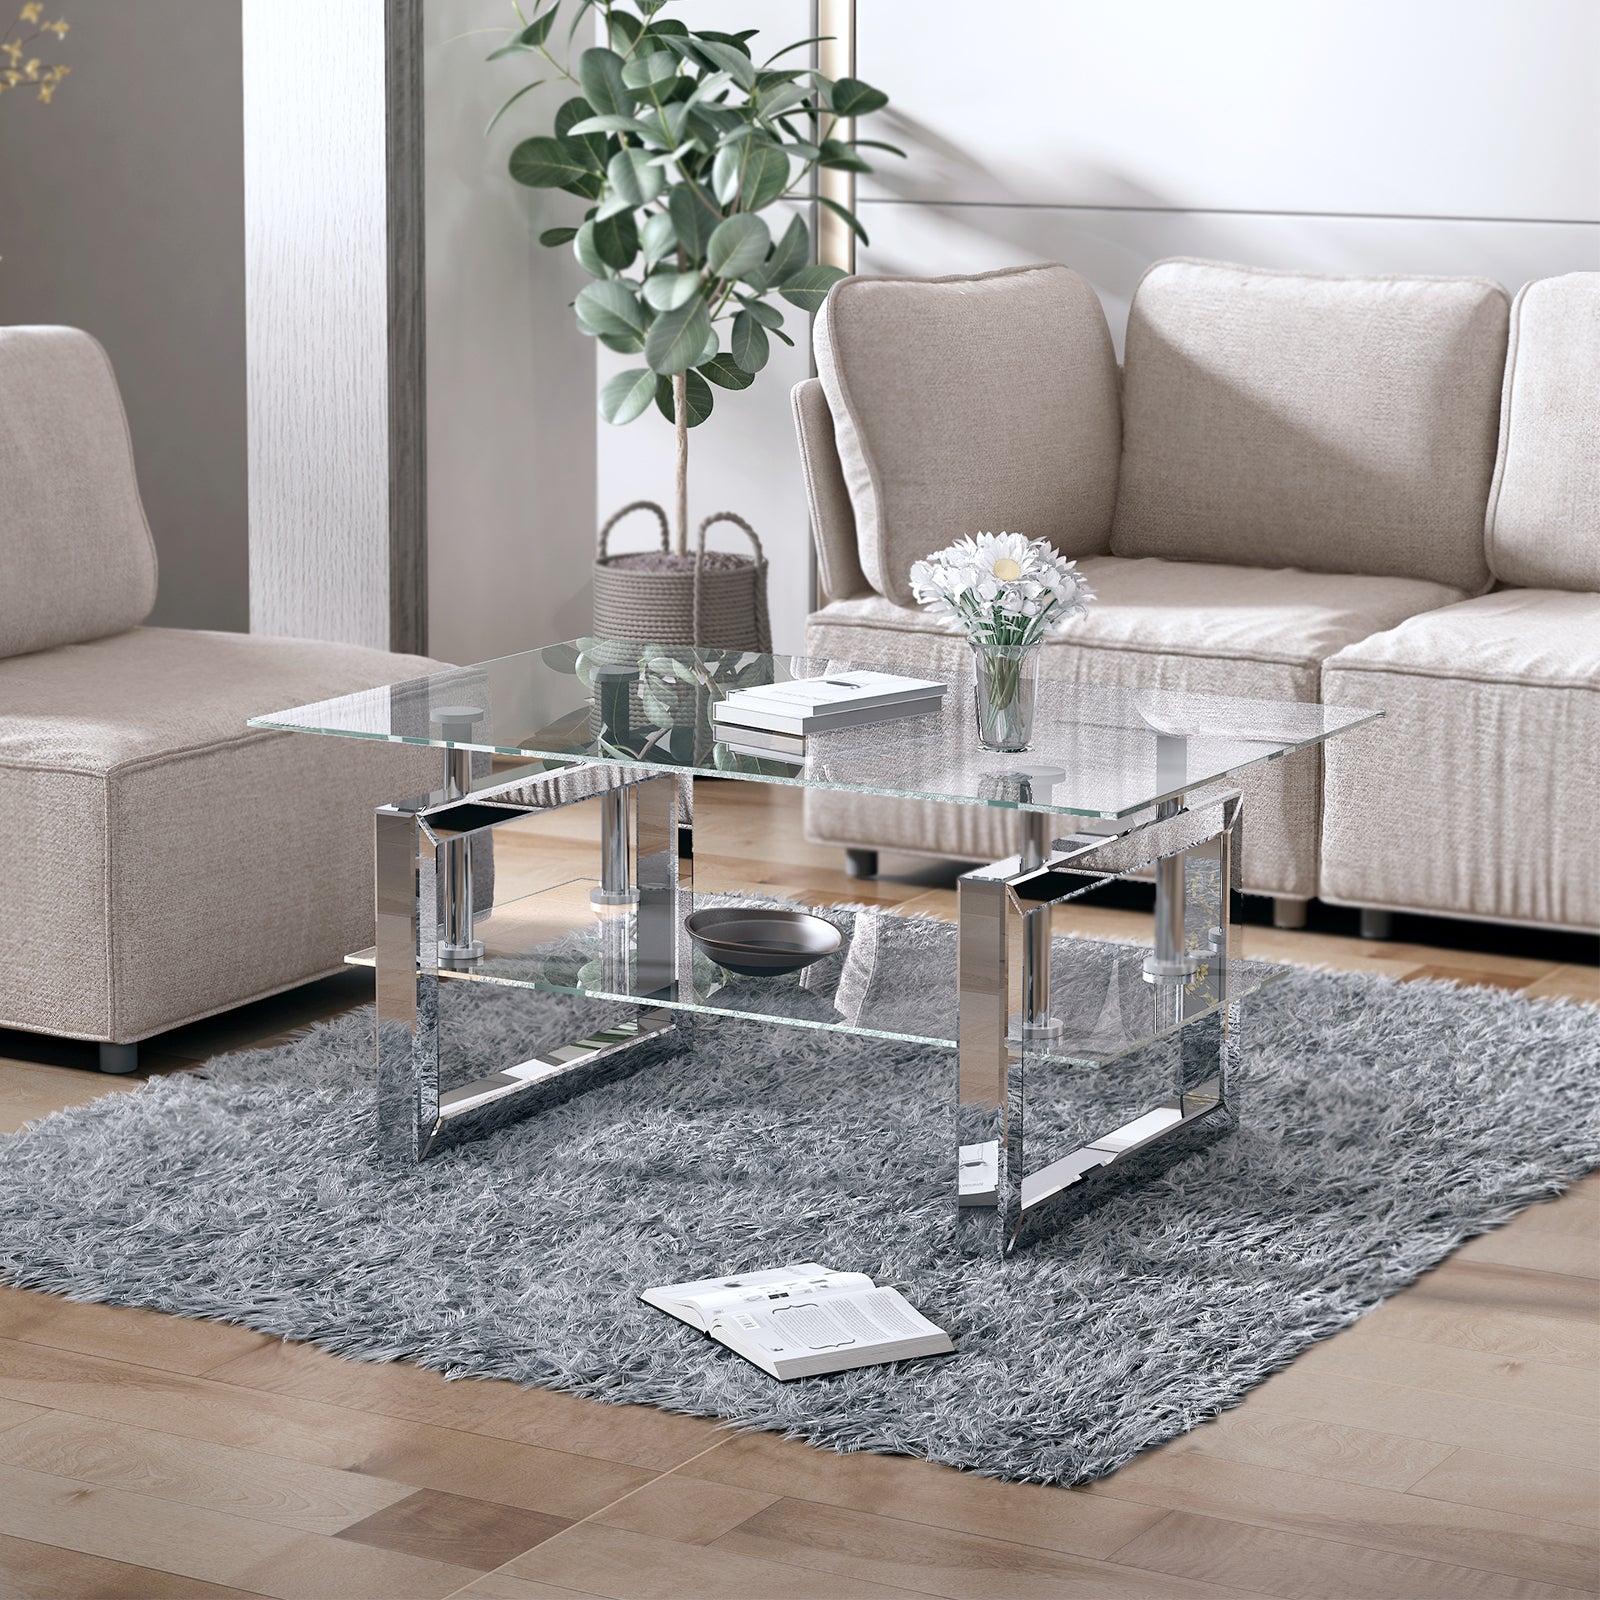 Mjkone Mirrored Coffee Table with 2 Mirror Square Legs, Glass Tables for Living Room, Glass Coffee Table, Modern Coffee Table, Center Table for Living Room/Office